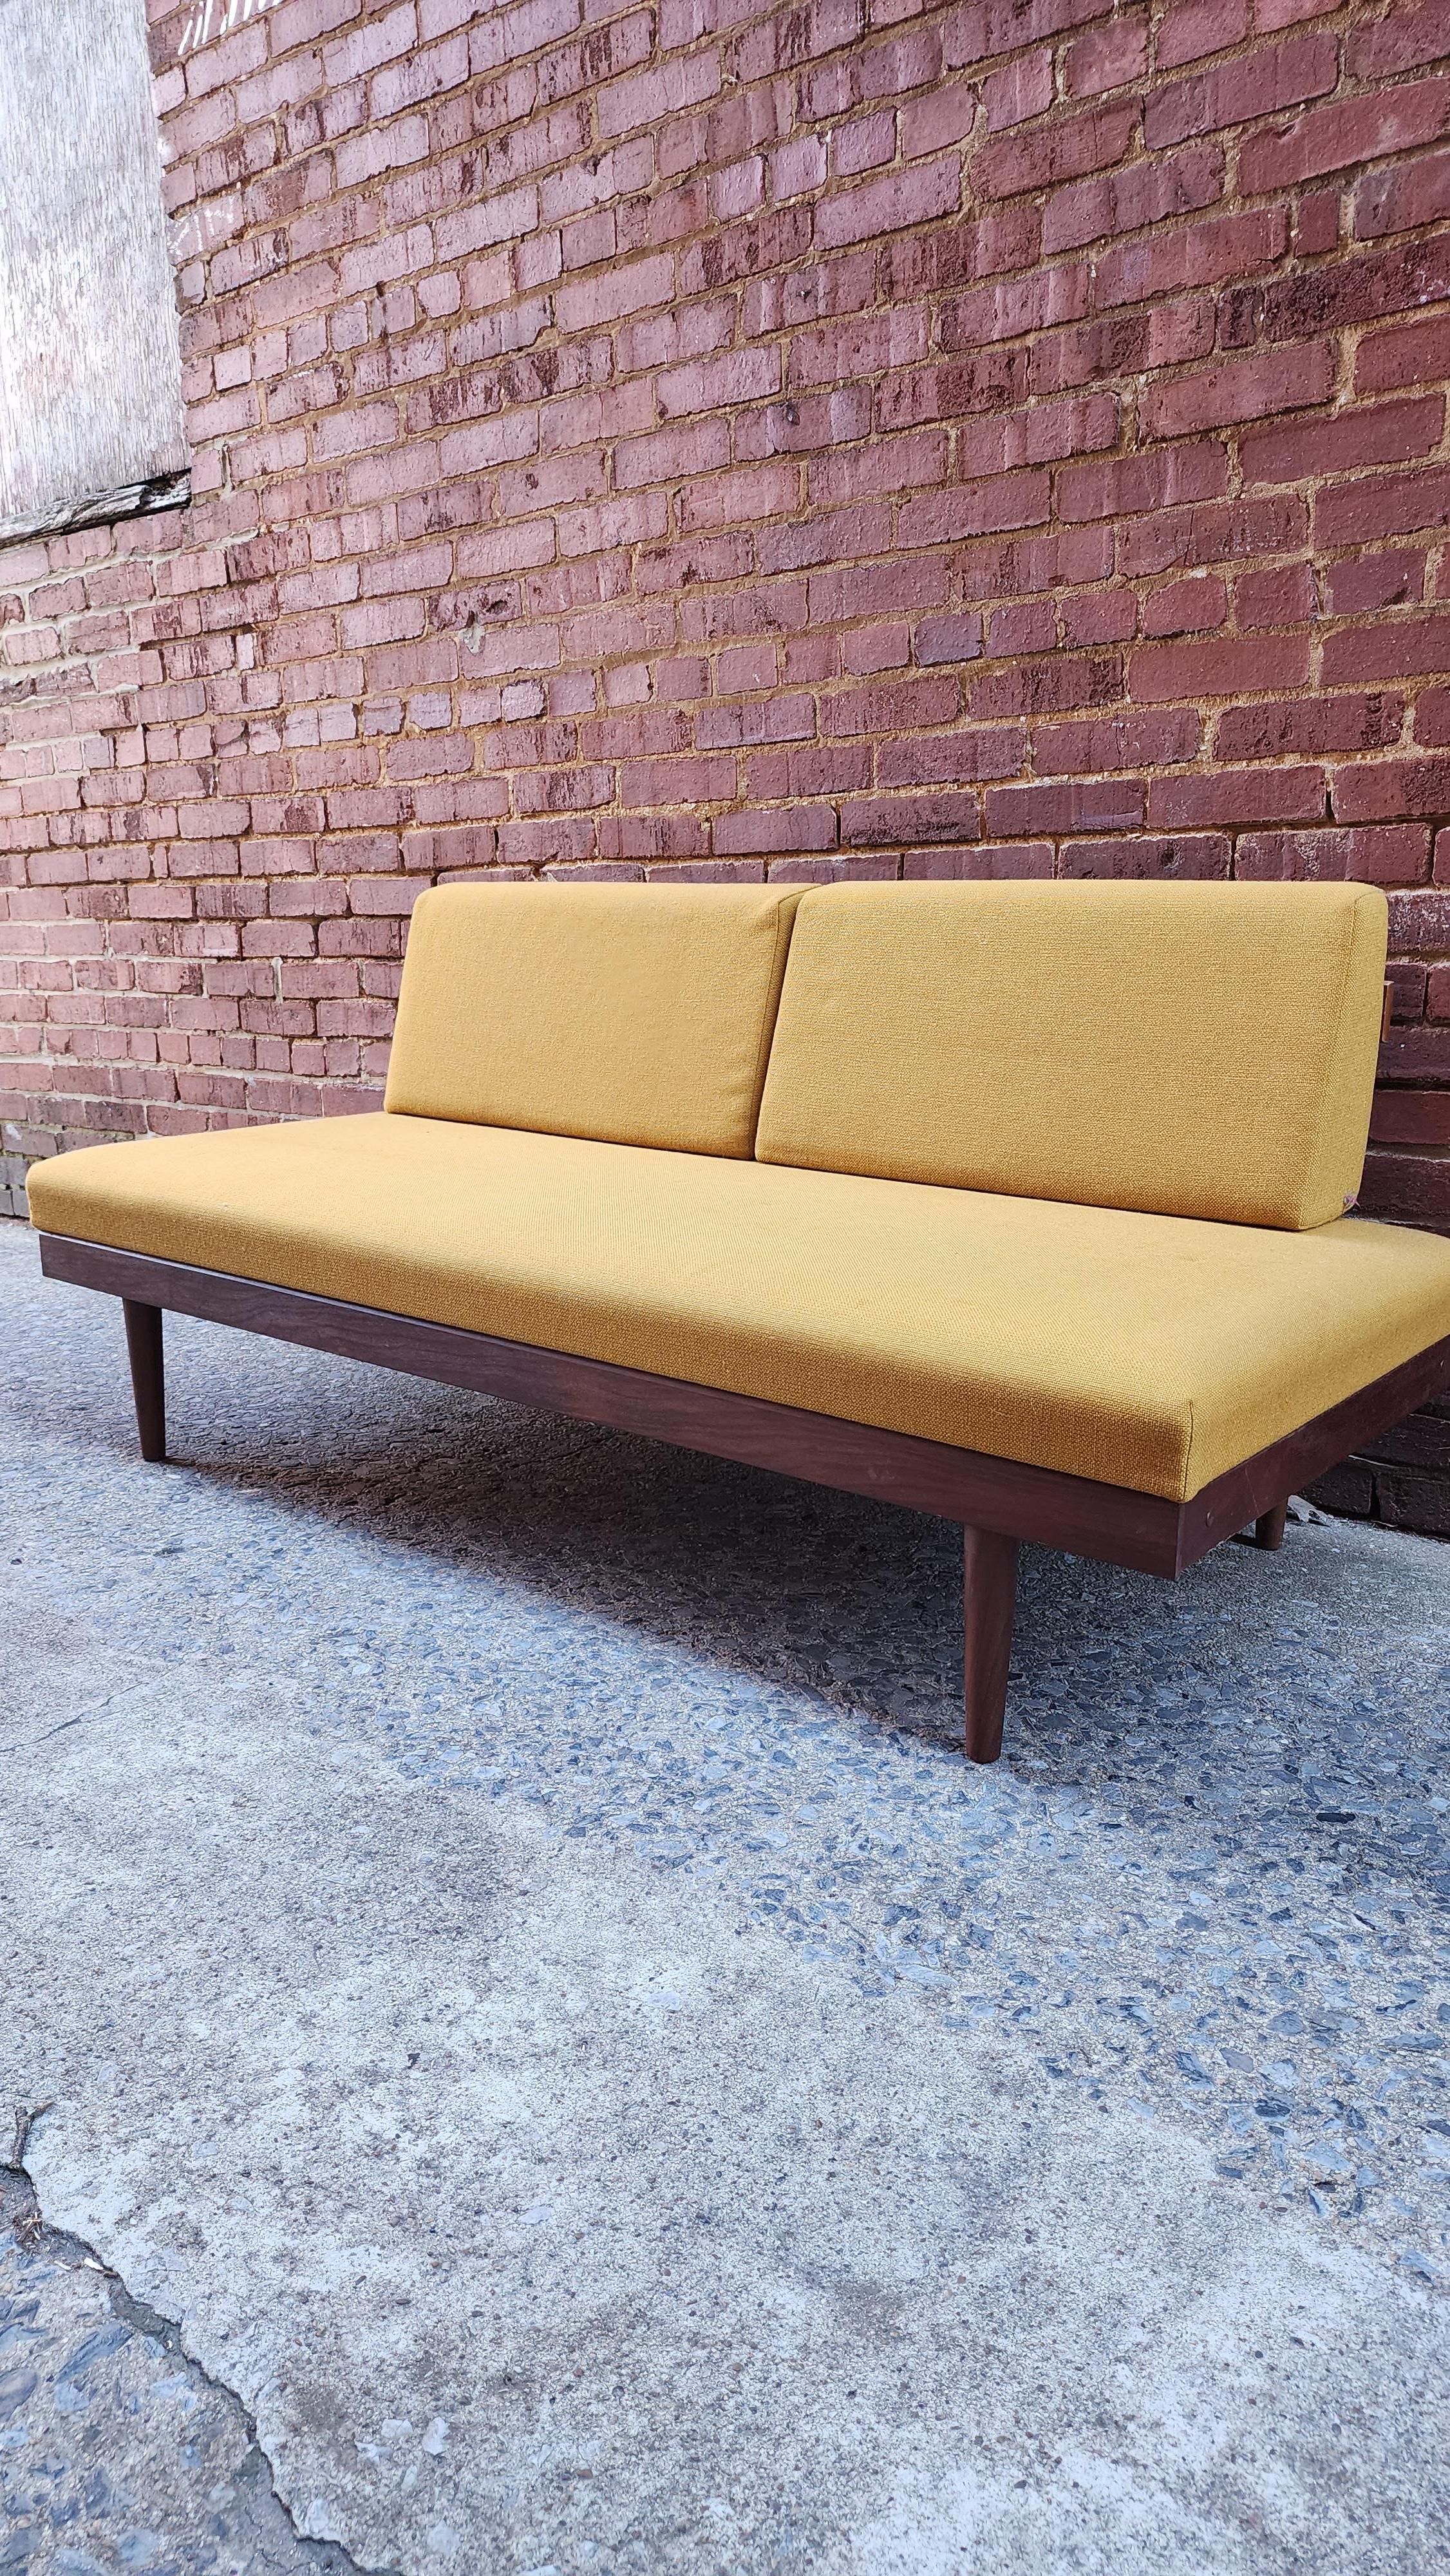 This Danish teak sofa has a secret. It has hide-away side tables but even better, it opens up into a very comfy bed. One of the most clever designs of the 50s, these are are in very good original condition. Some slight staining on fabric. See